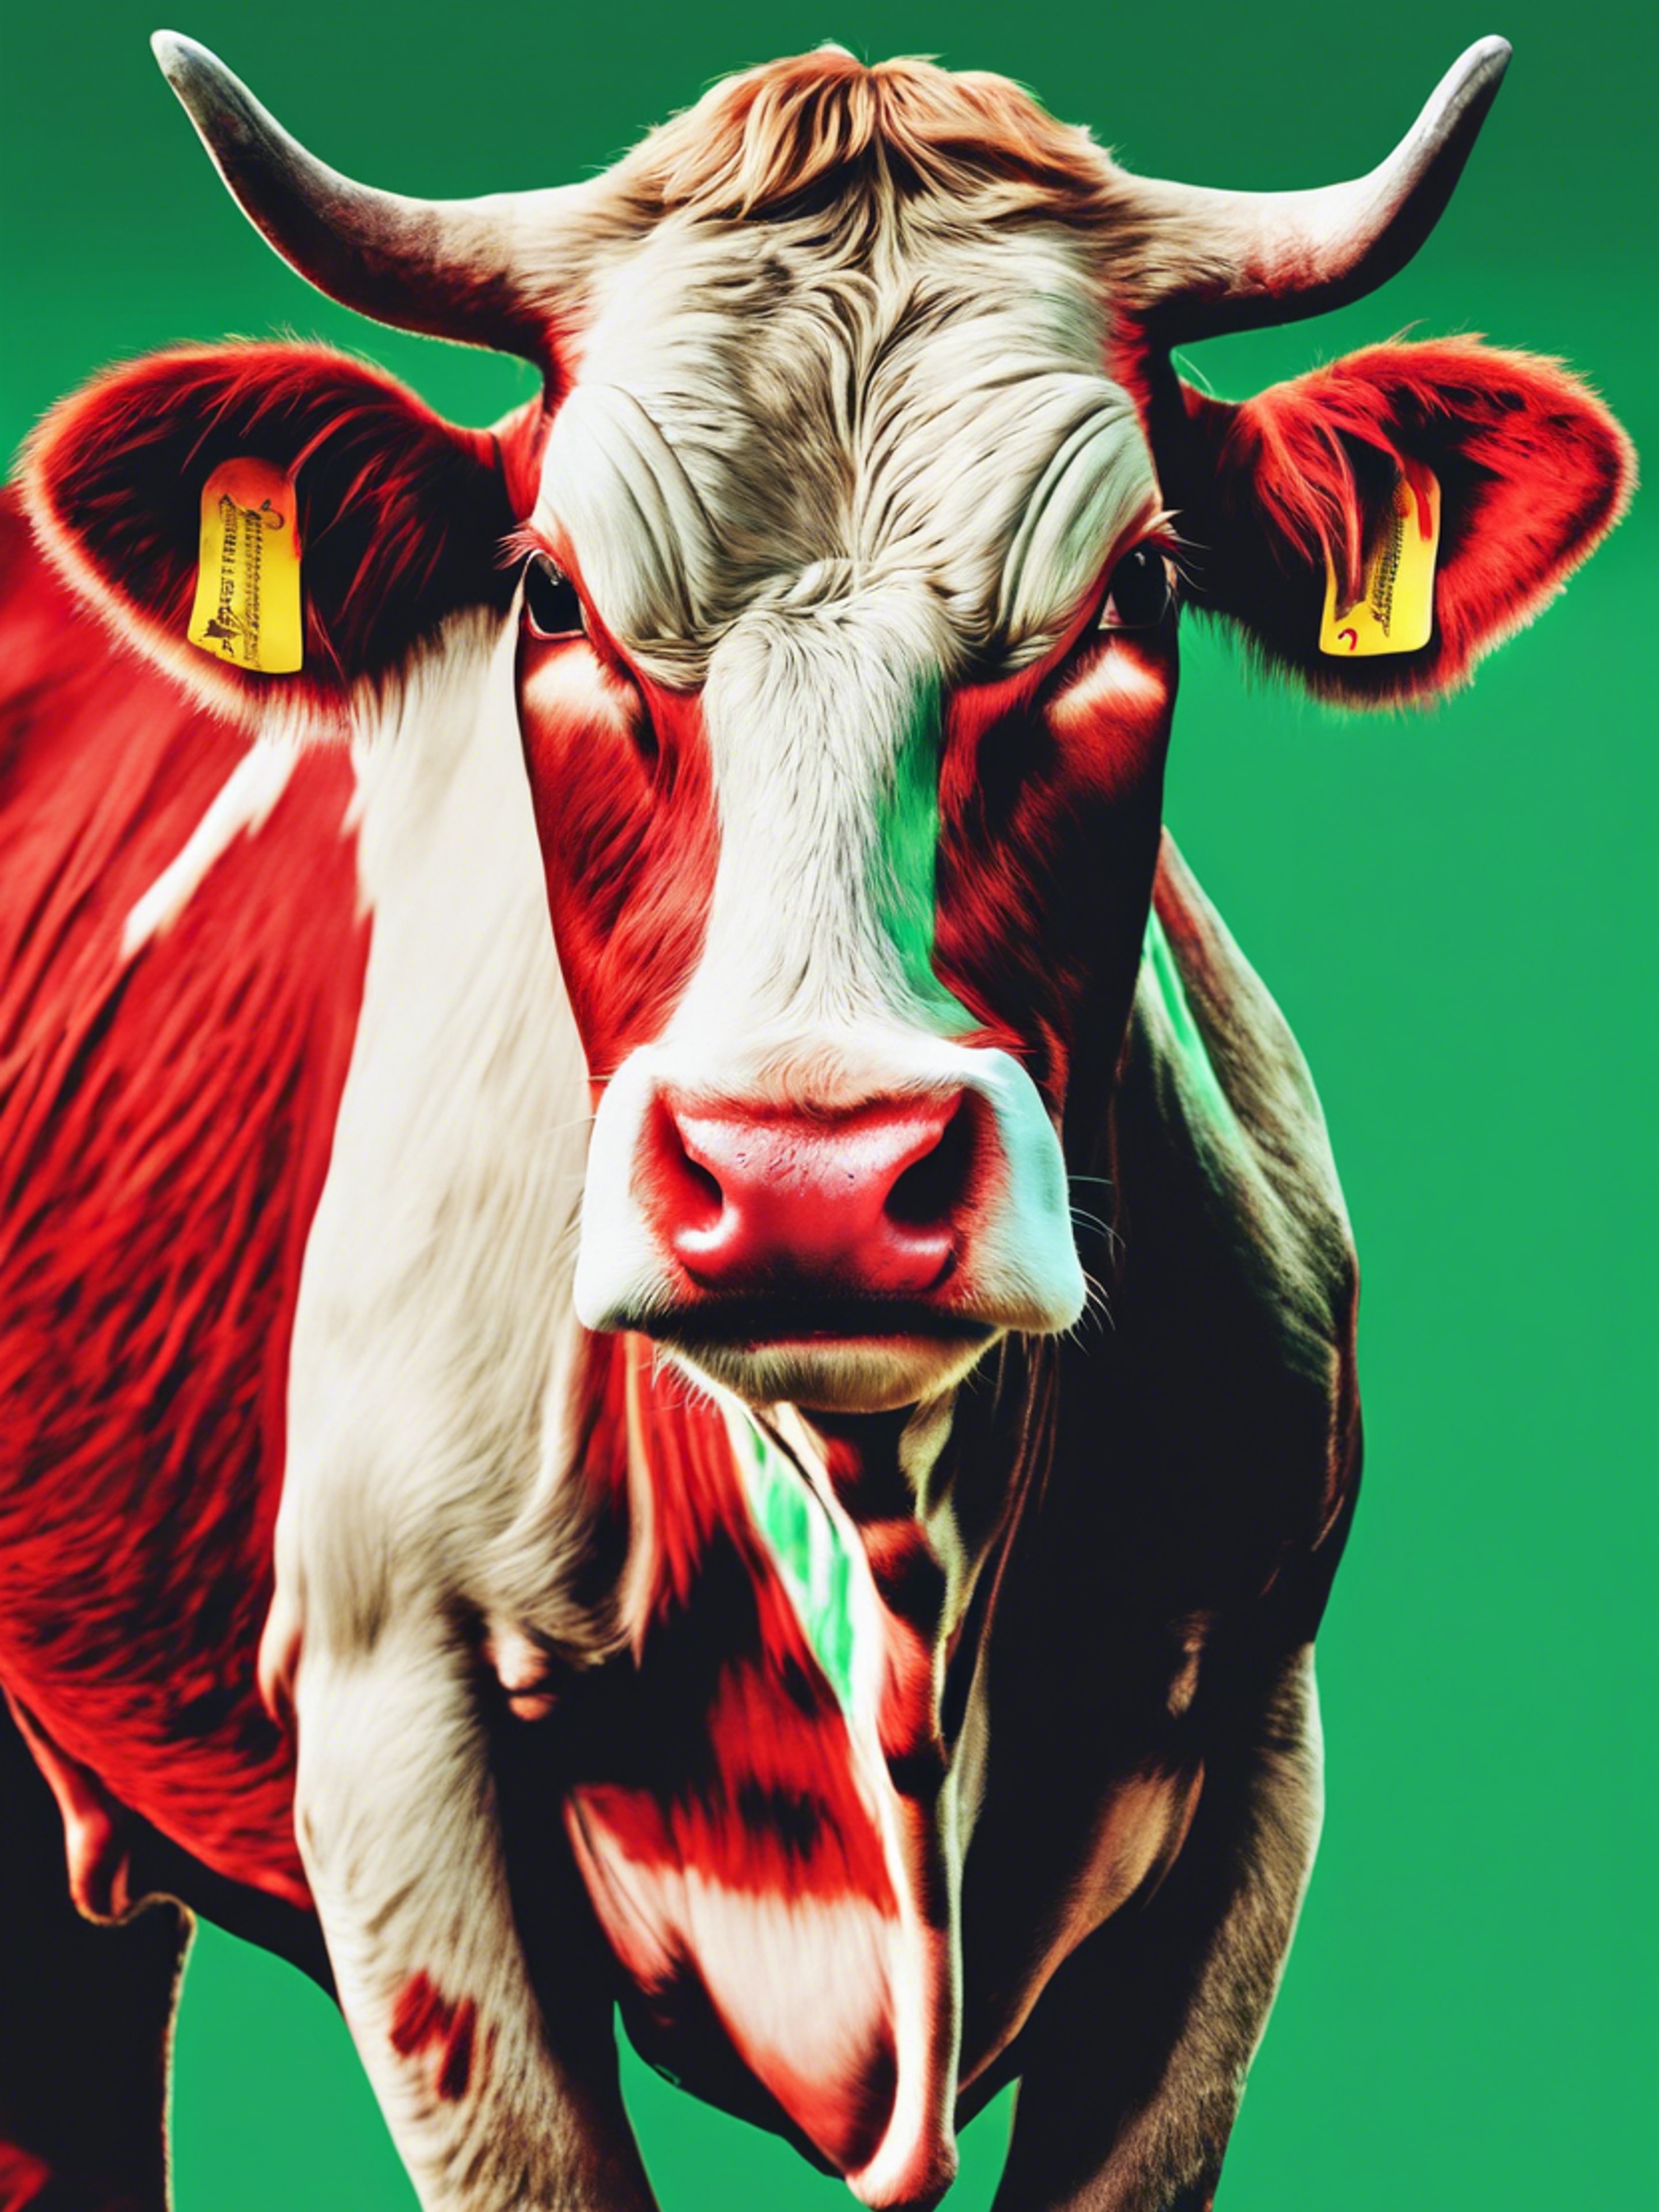 Pop-art style cow print in a palette of red and green. 벽지[5b65906f2b9649418c8c]